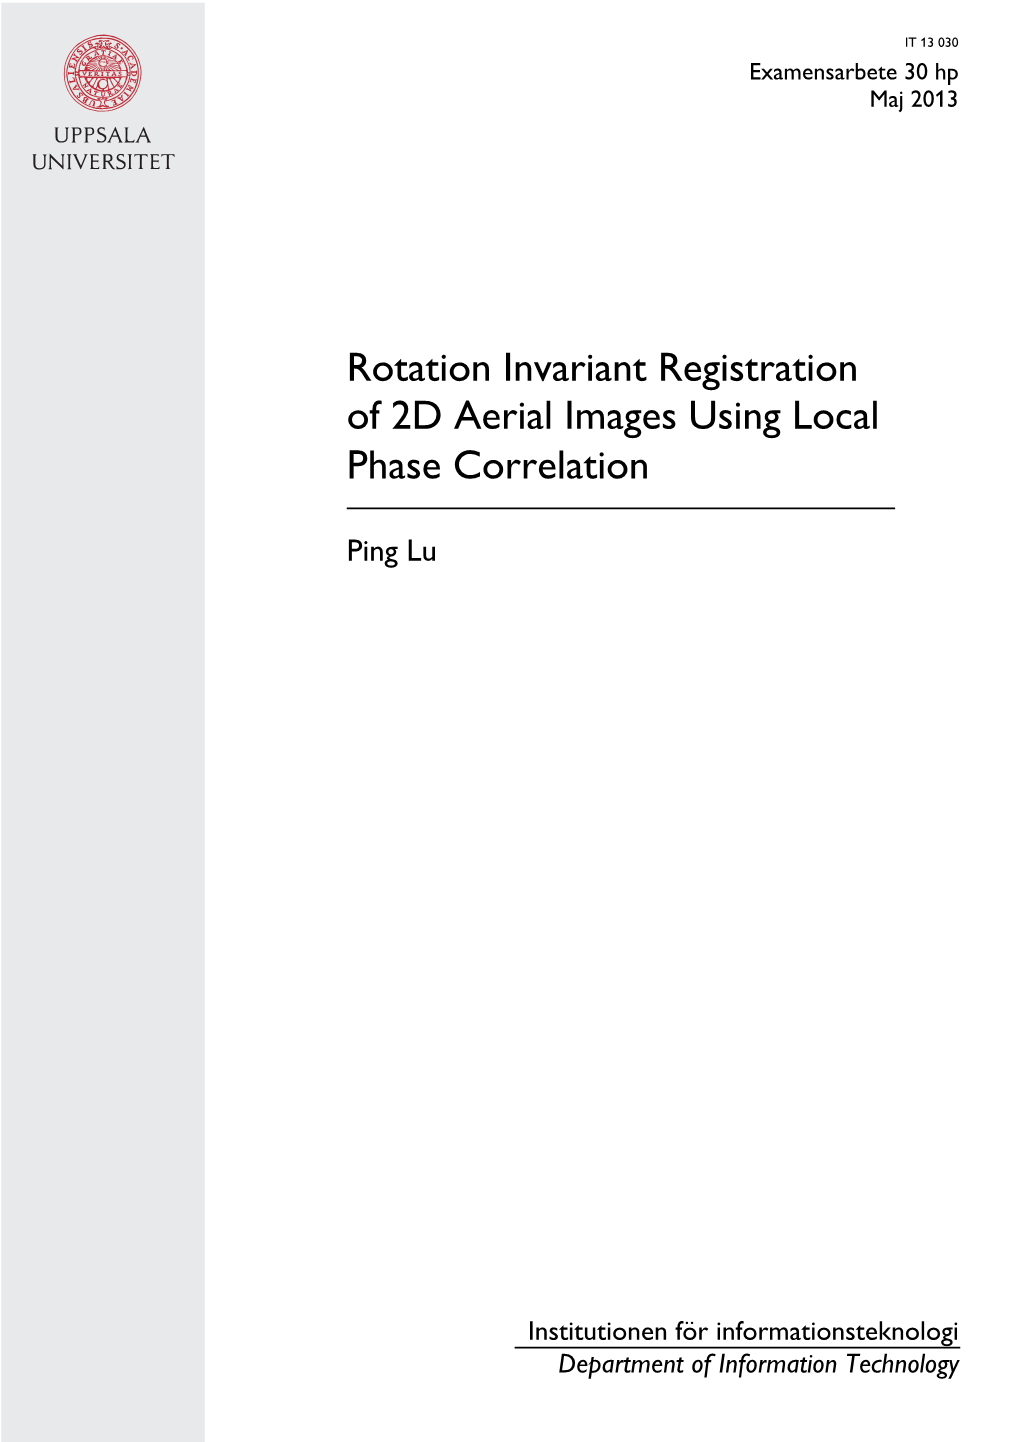 Rotation Invariant Registration of 2D Aerial Images Using Local Phase Correlation